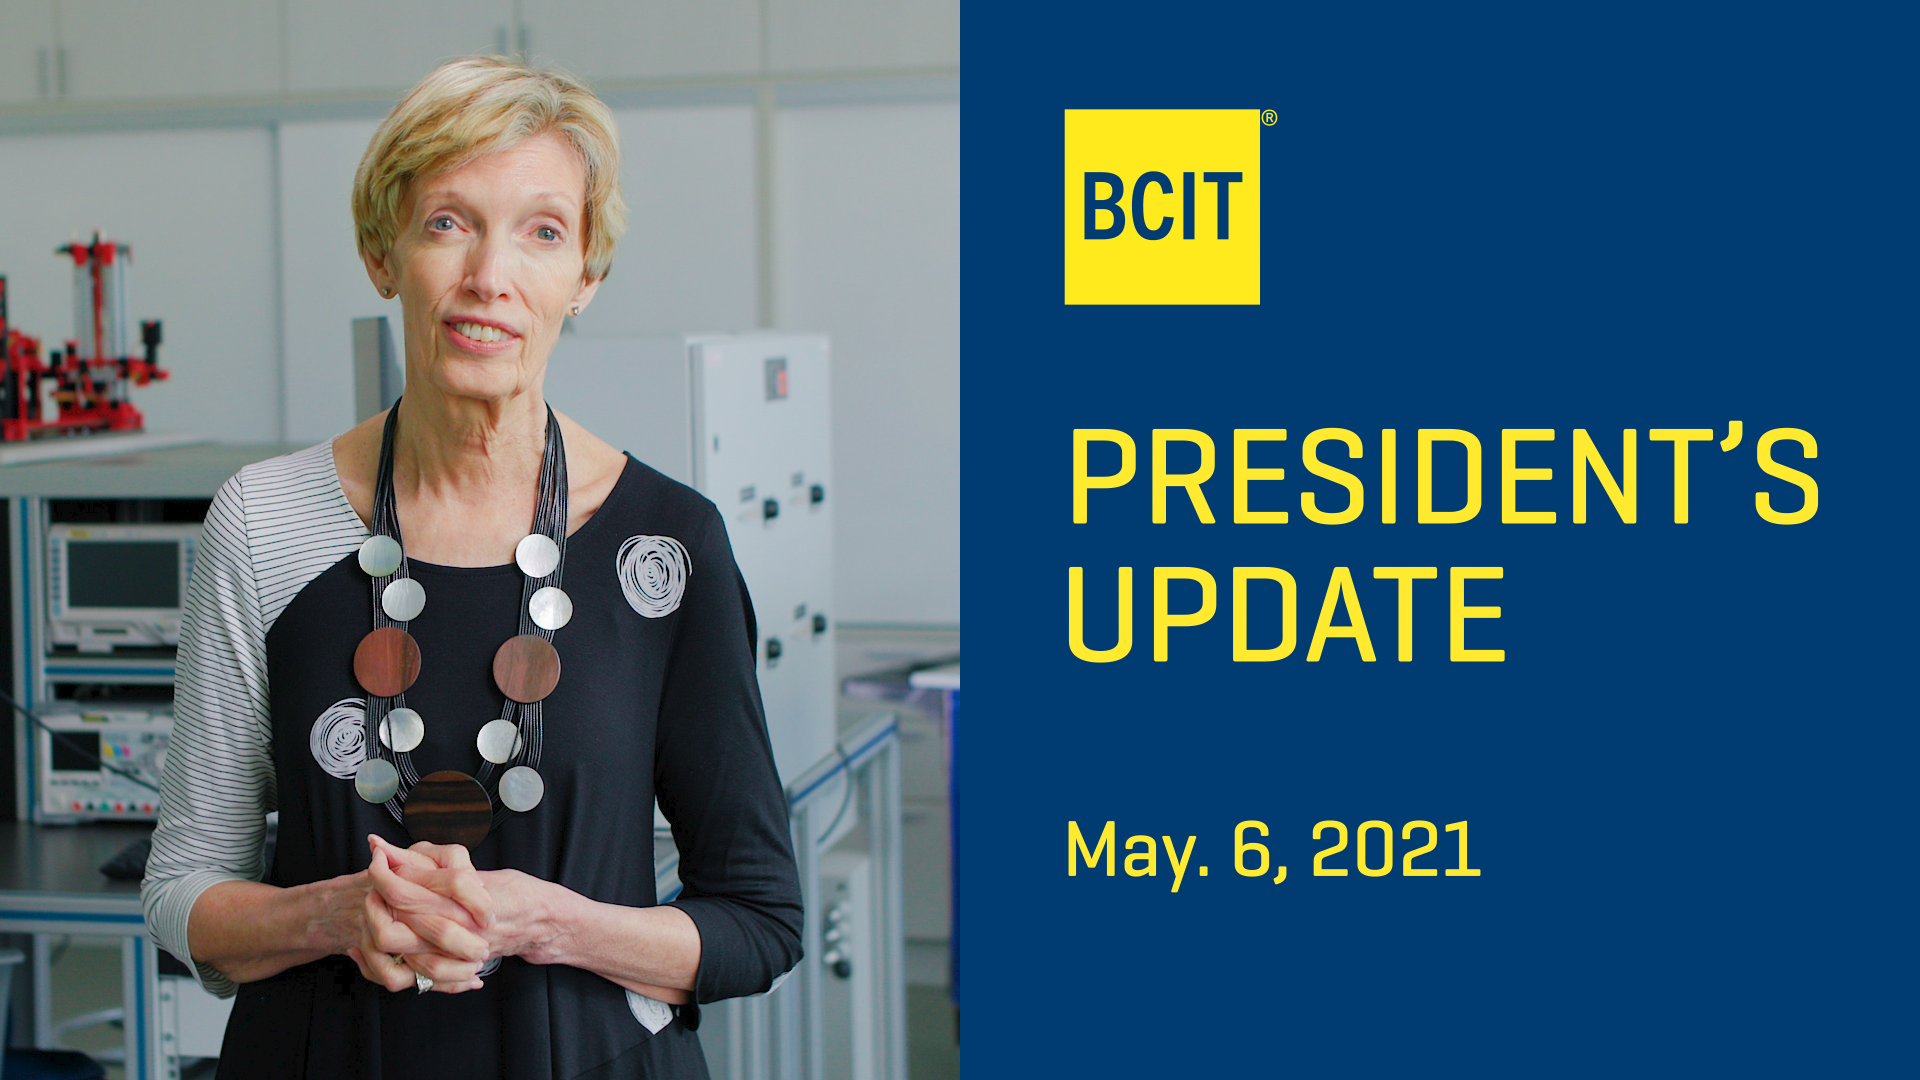 Kathy Kinloch in the digital transformation centre on the BCIT campus